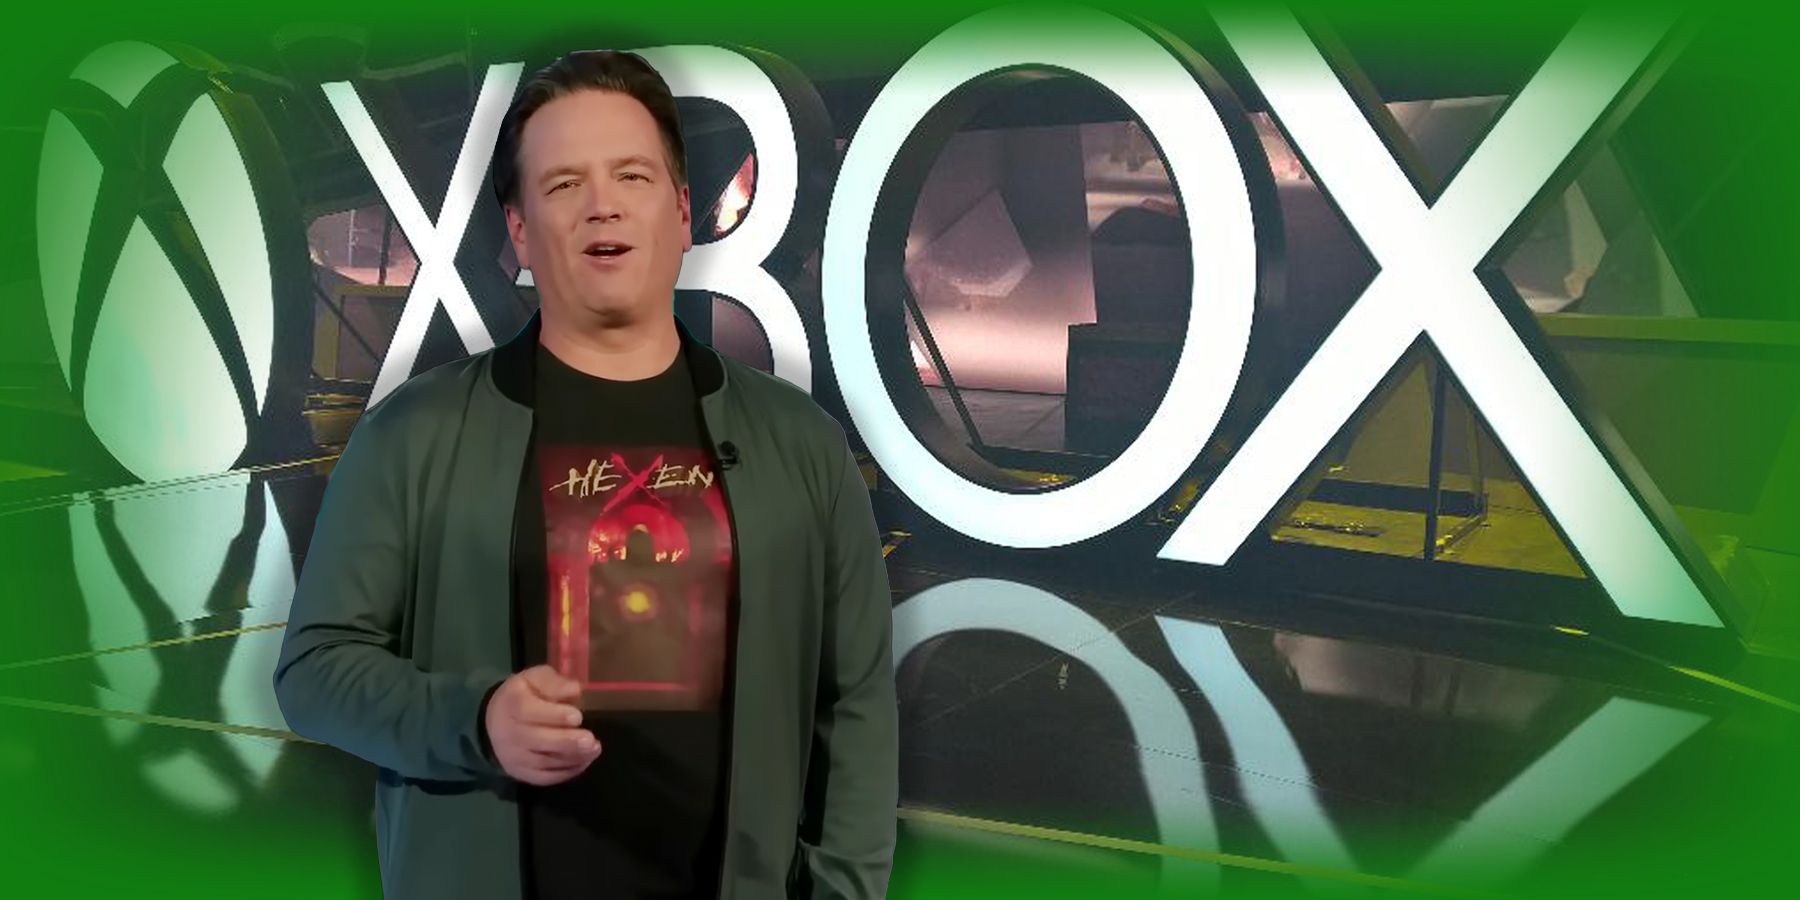 Xbox Year in Review is now live, and Phil Spencer might have more hours in  Starfield than you